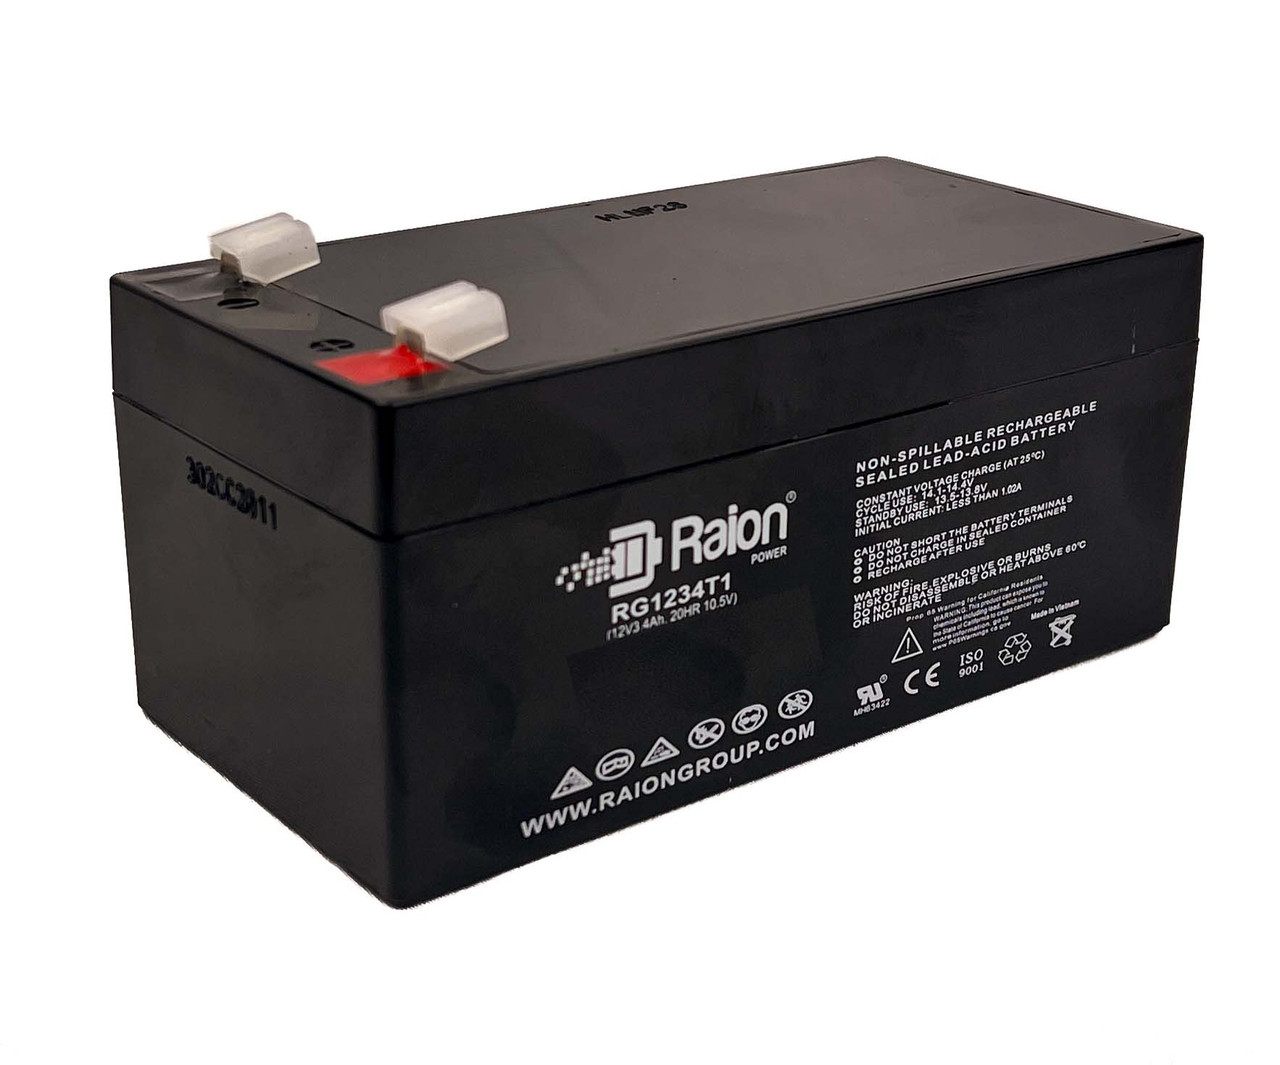 Raion Power 12V 3.4Ah Non-Spillable Replacement UPS Battery for APC RBC35